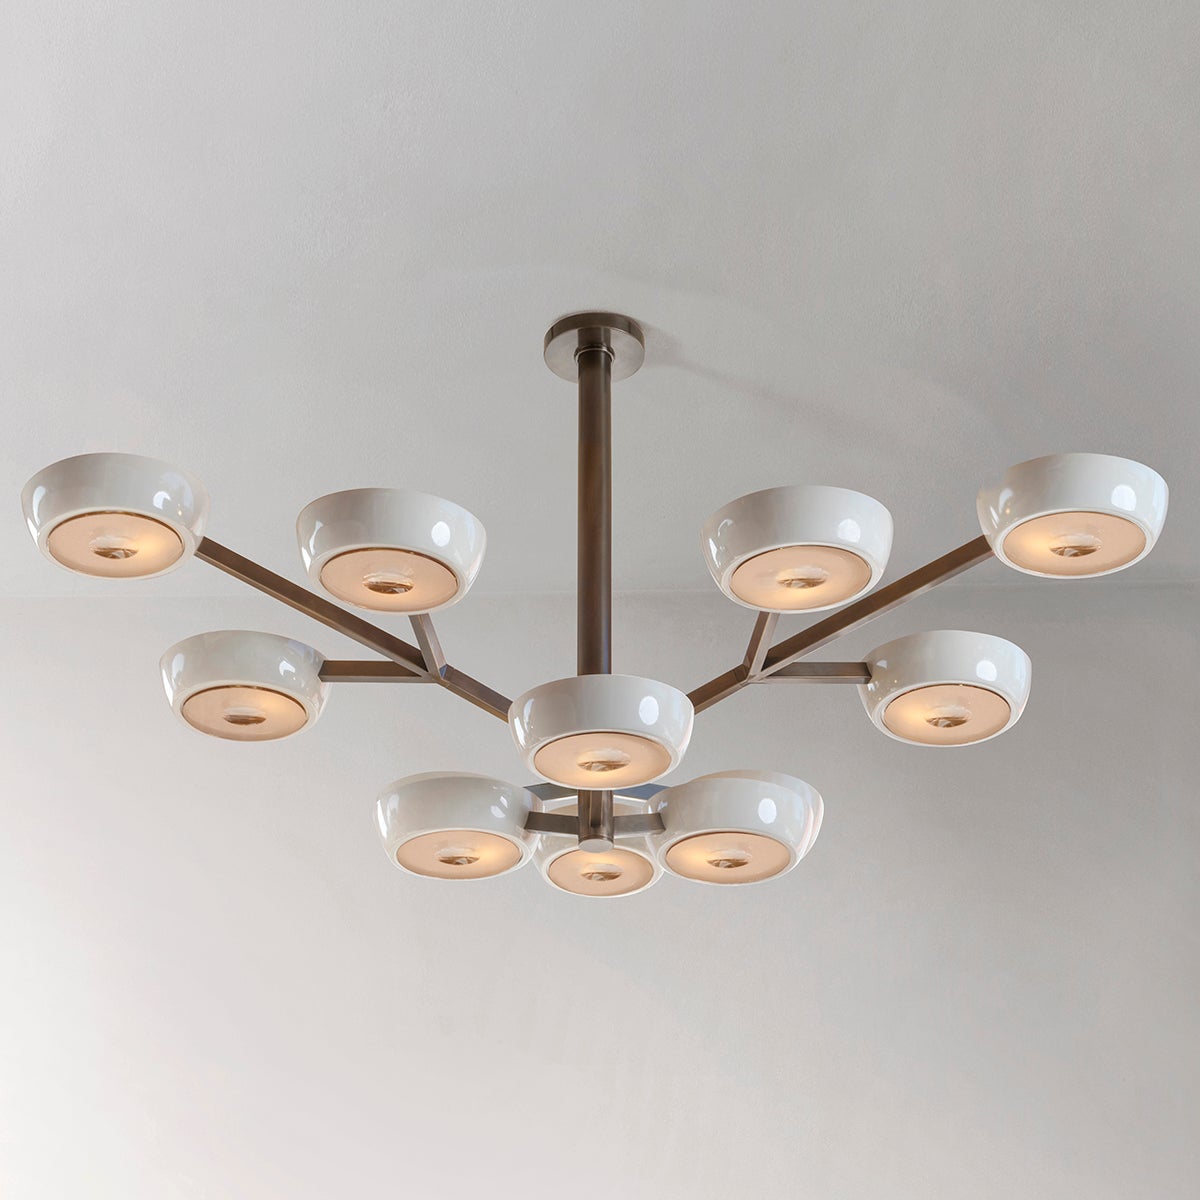 The Rose Grande ceiling light is distinguished by its branching two-tiered frame ending with clean and modern shades. With the option to customize the color of the shades, the finish of the metal and the type of glass, the Rose Grande is one of our